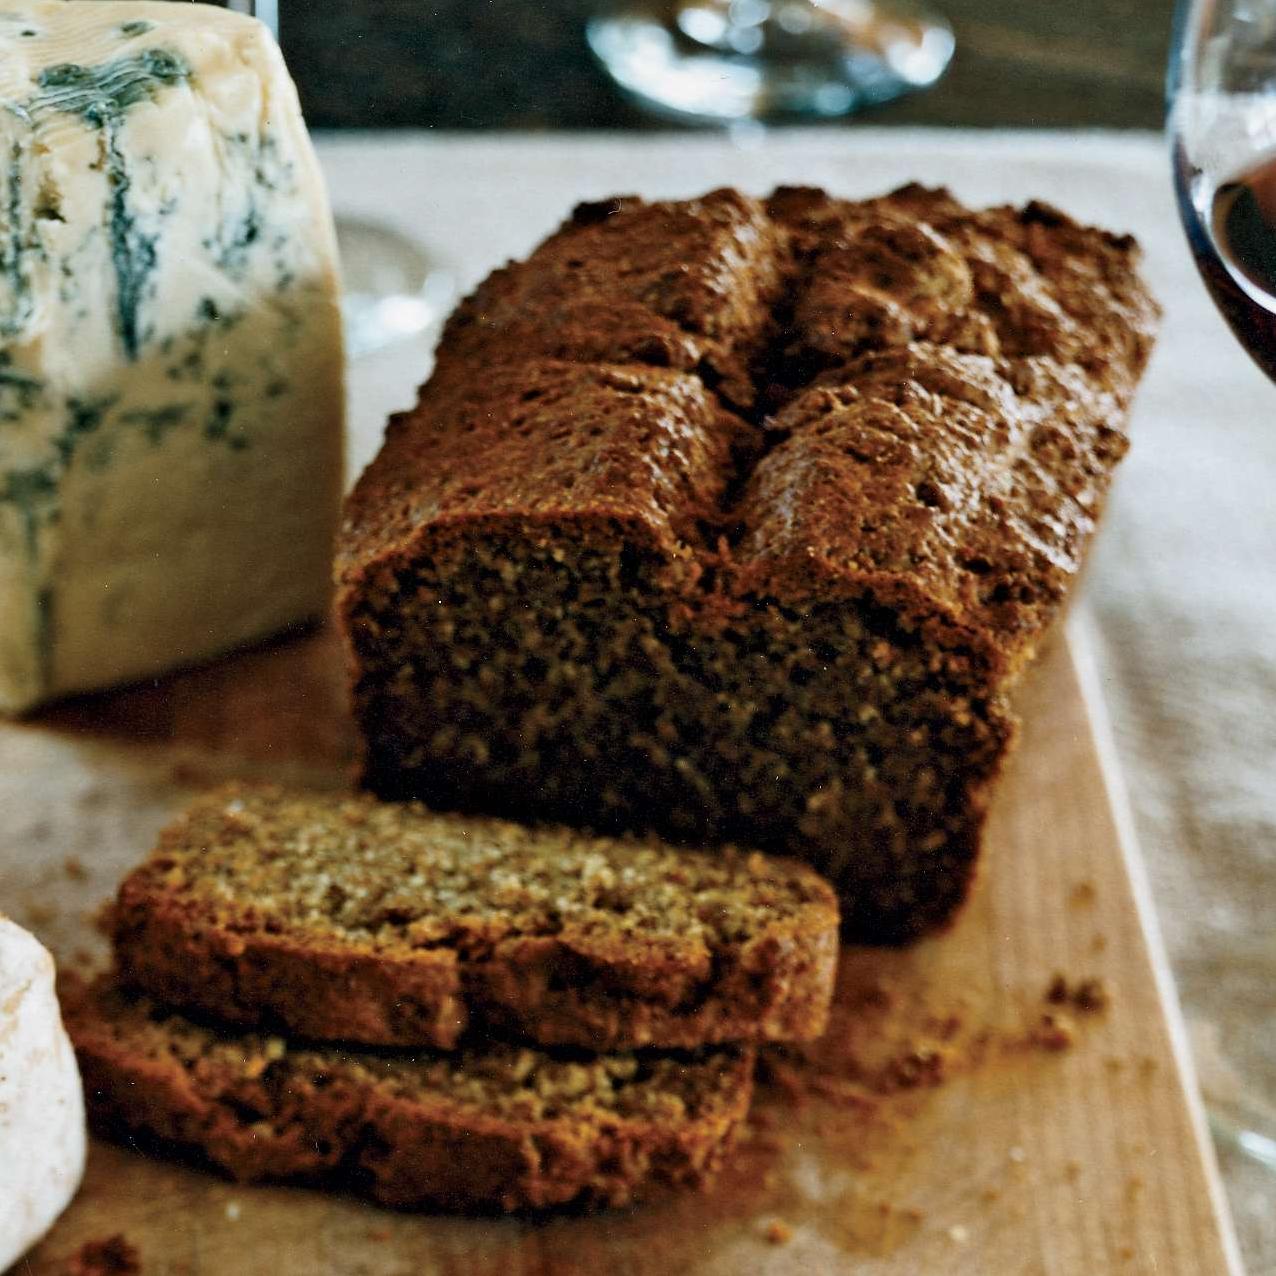  Slice up this hearty loaf and spread on your favorite butter or jam for the ultimate comfort food experience.